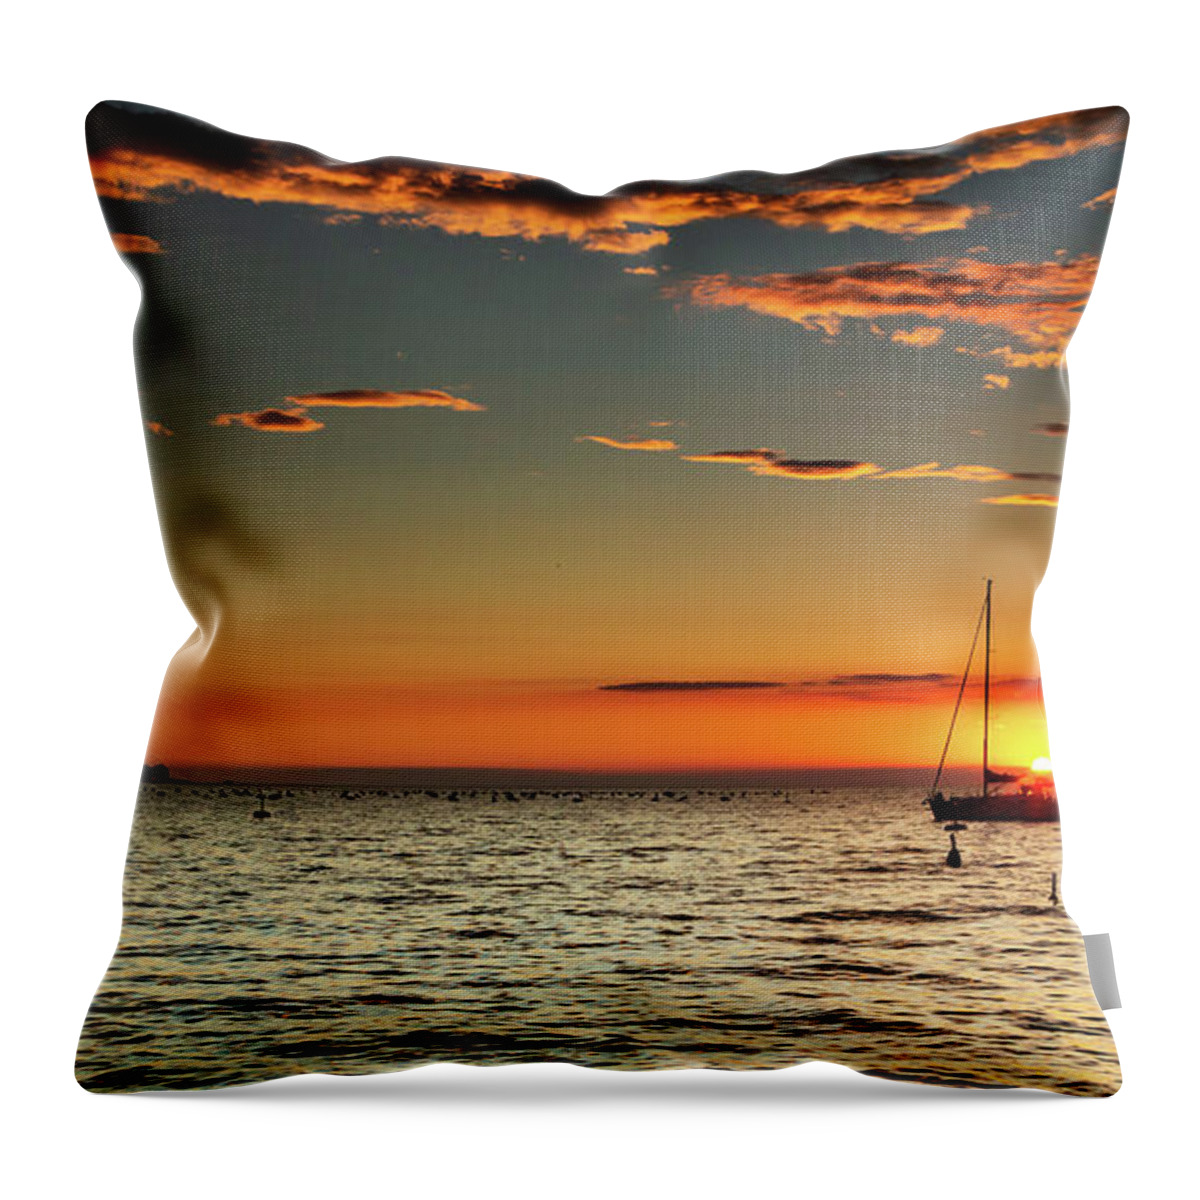 Sunset Throw Pillow featuring the photograph Adriatic Sunset by Ian Middleton